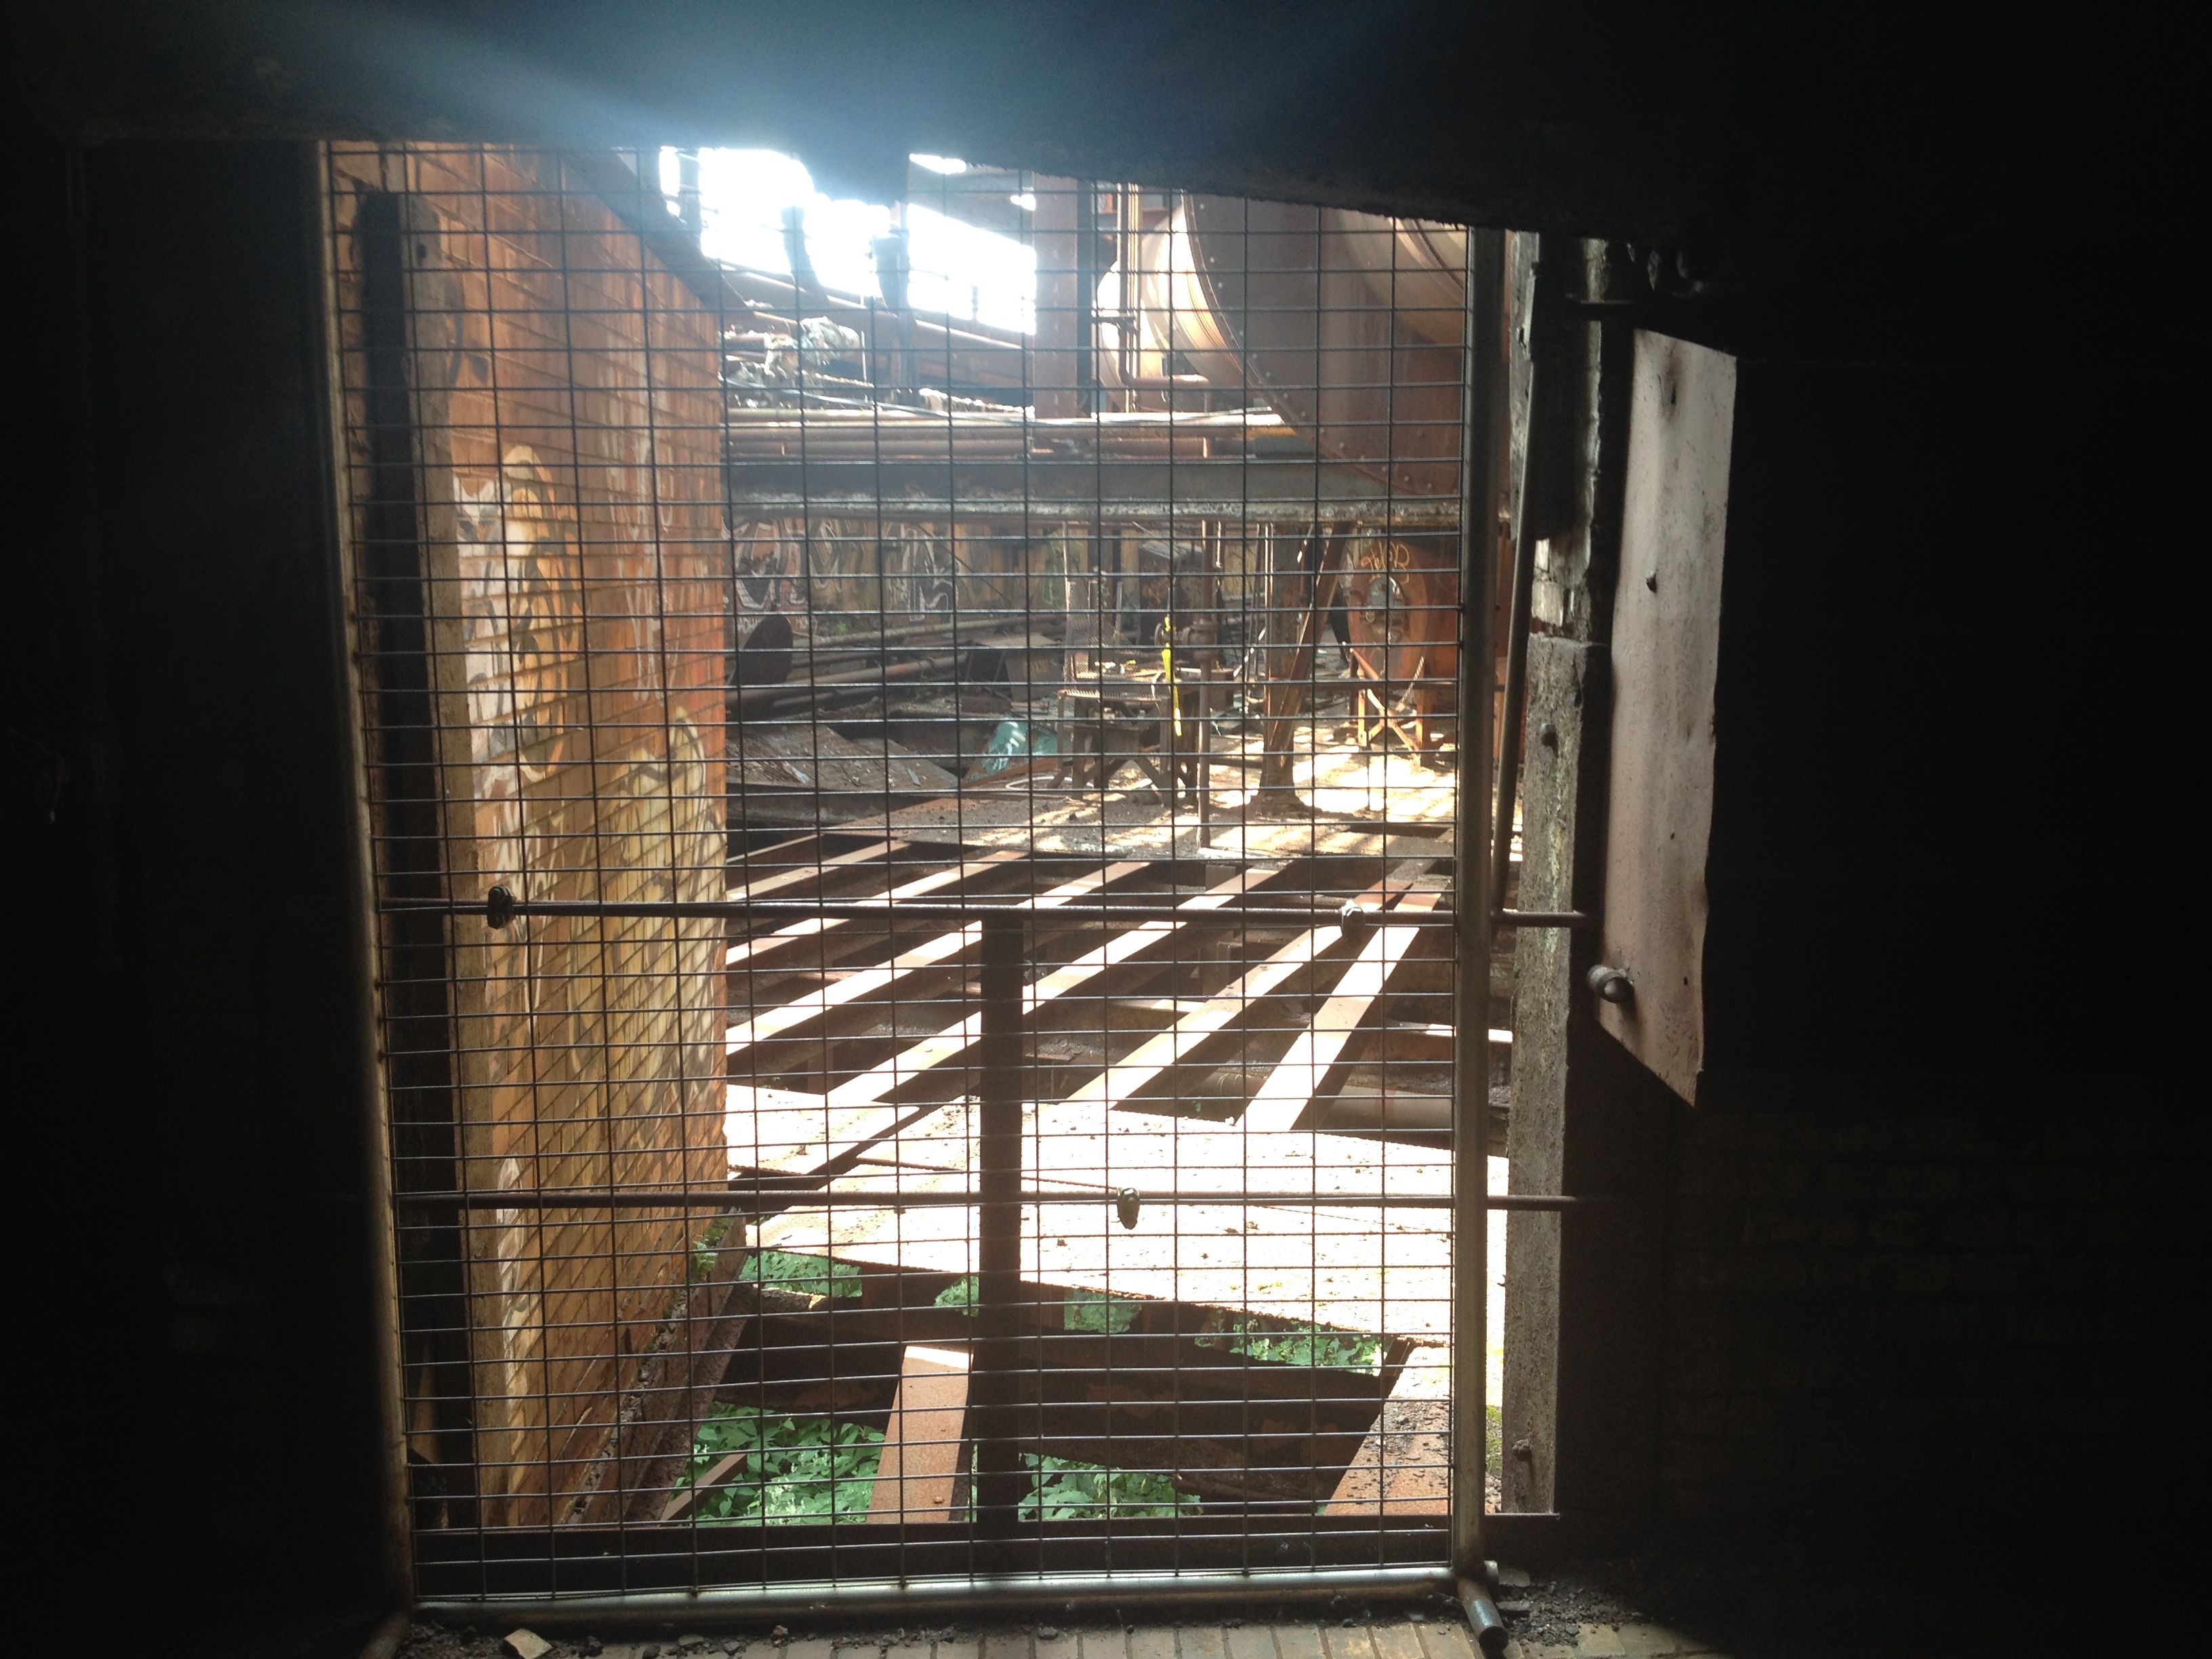 View through grate at blast furnace